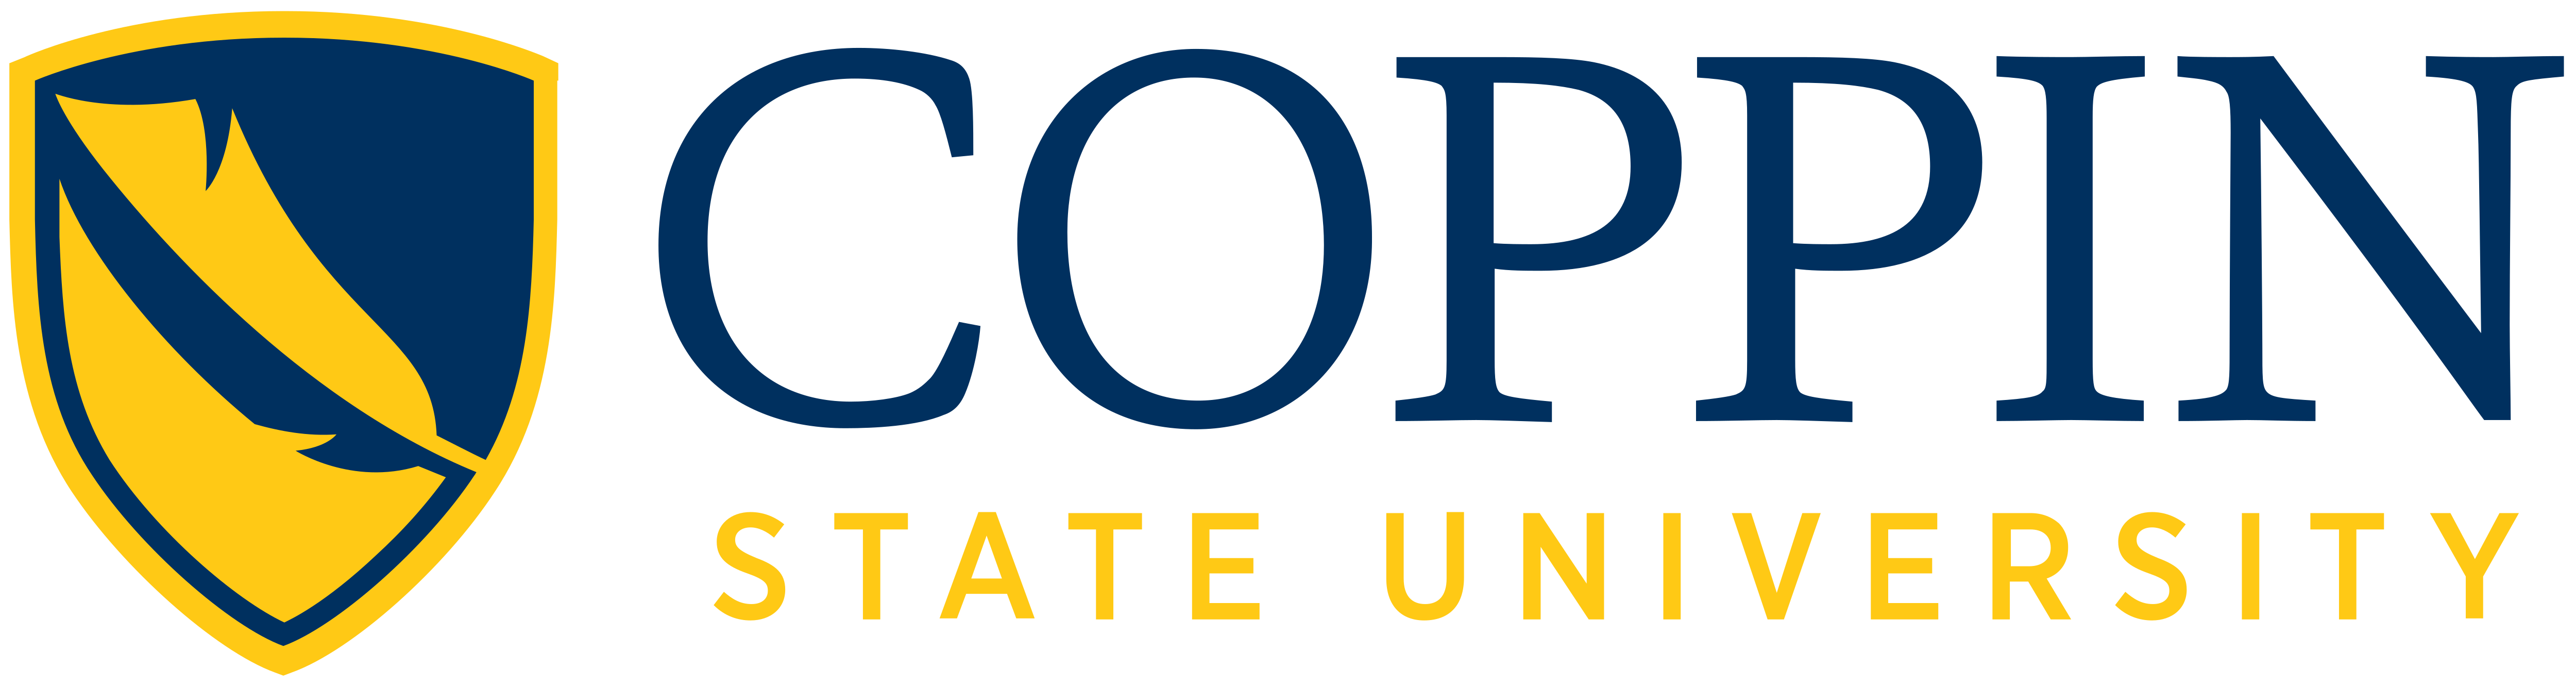 Coppin_State_University_logo SNF Parkway/MdFF